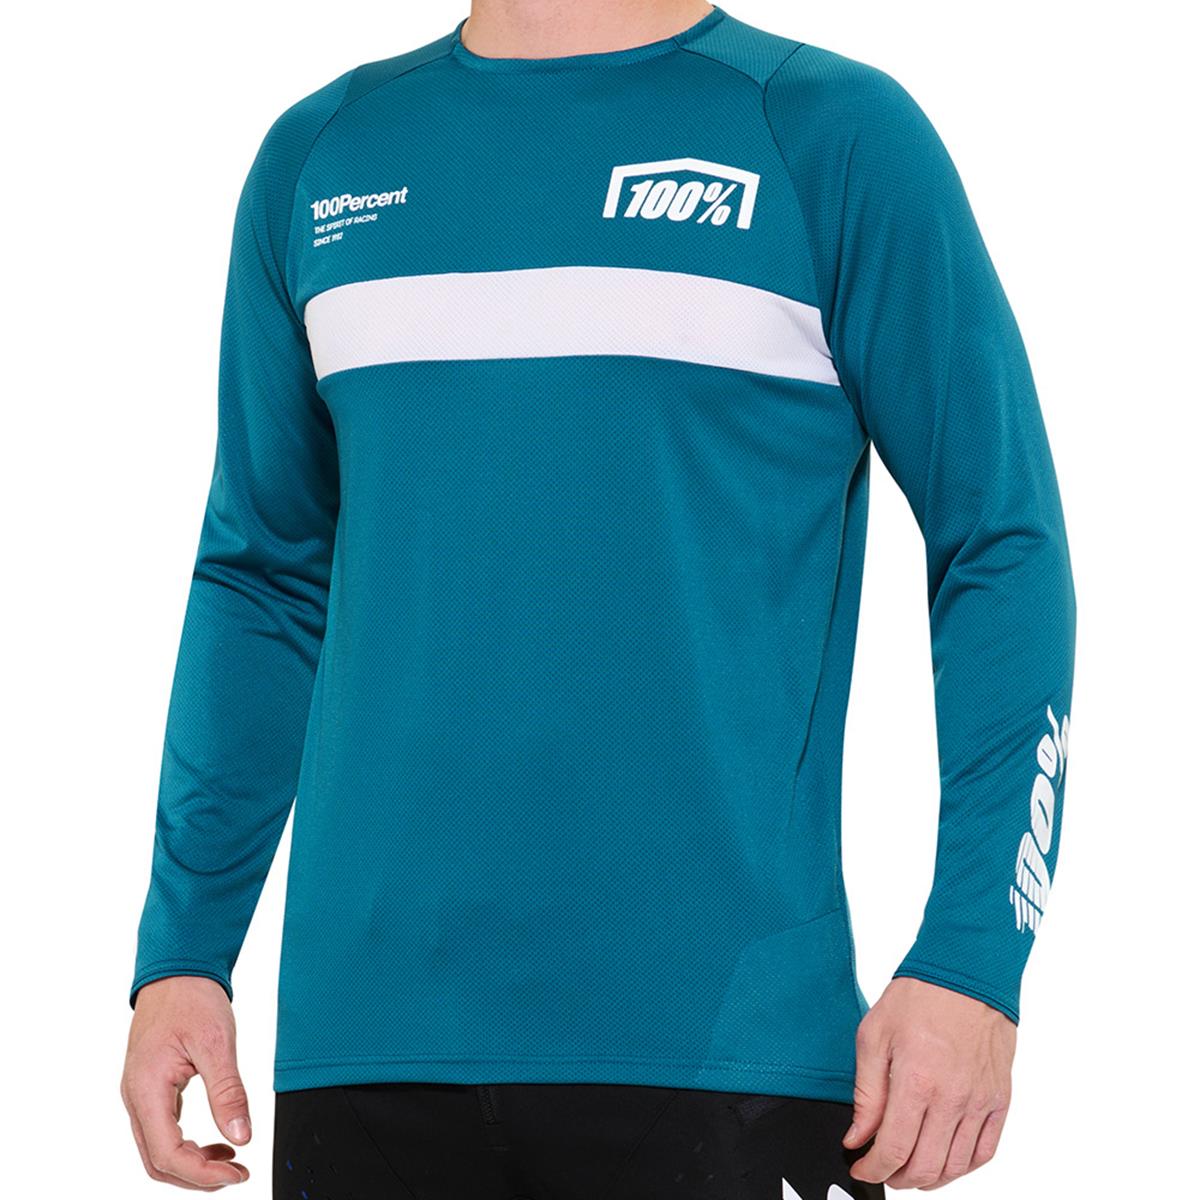 100% Maillot VTT Manches Longues R-Core Gulf